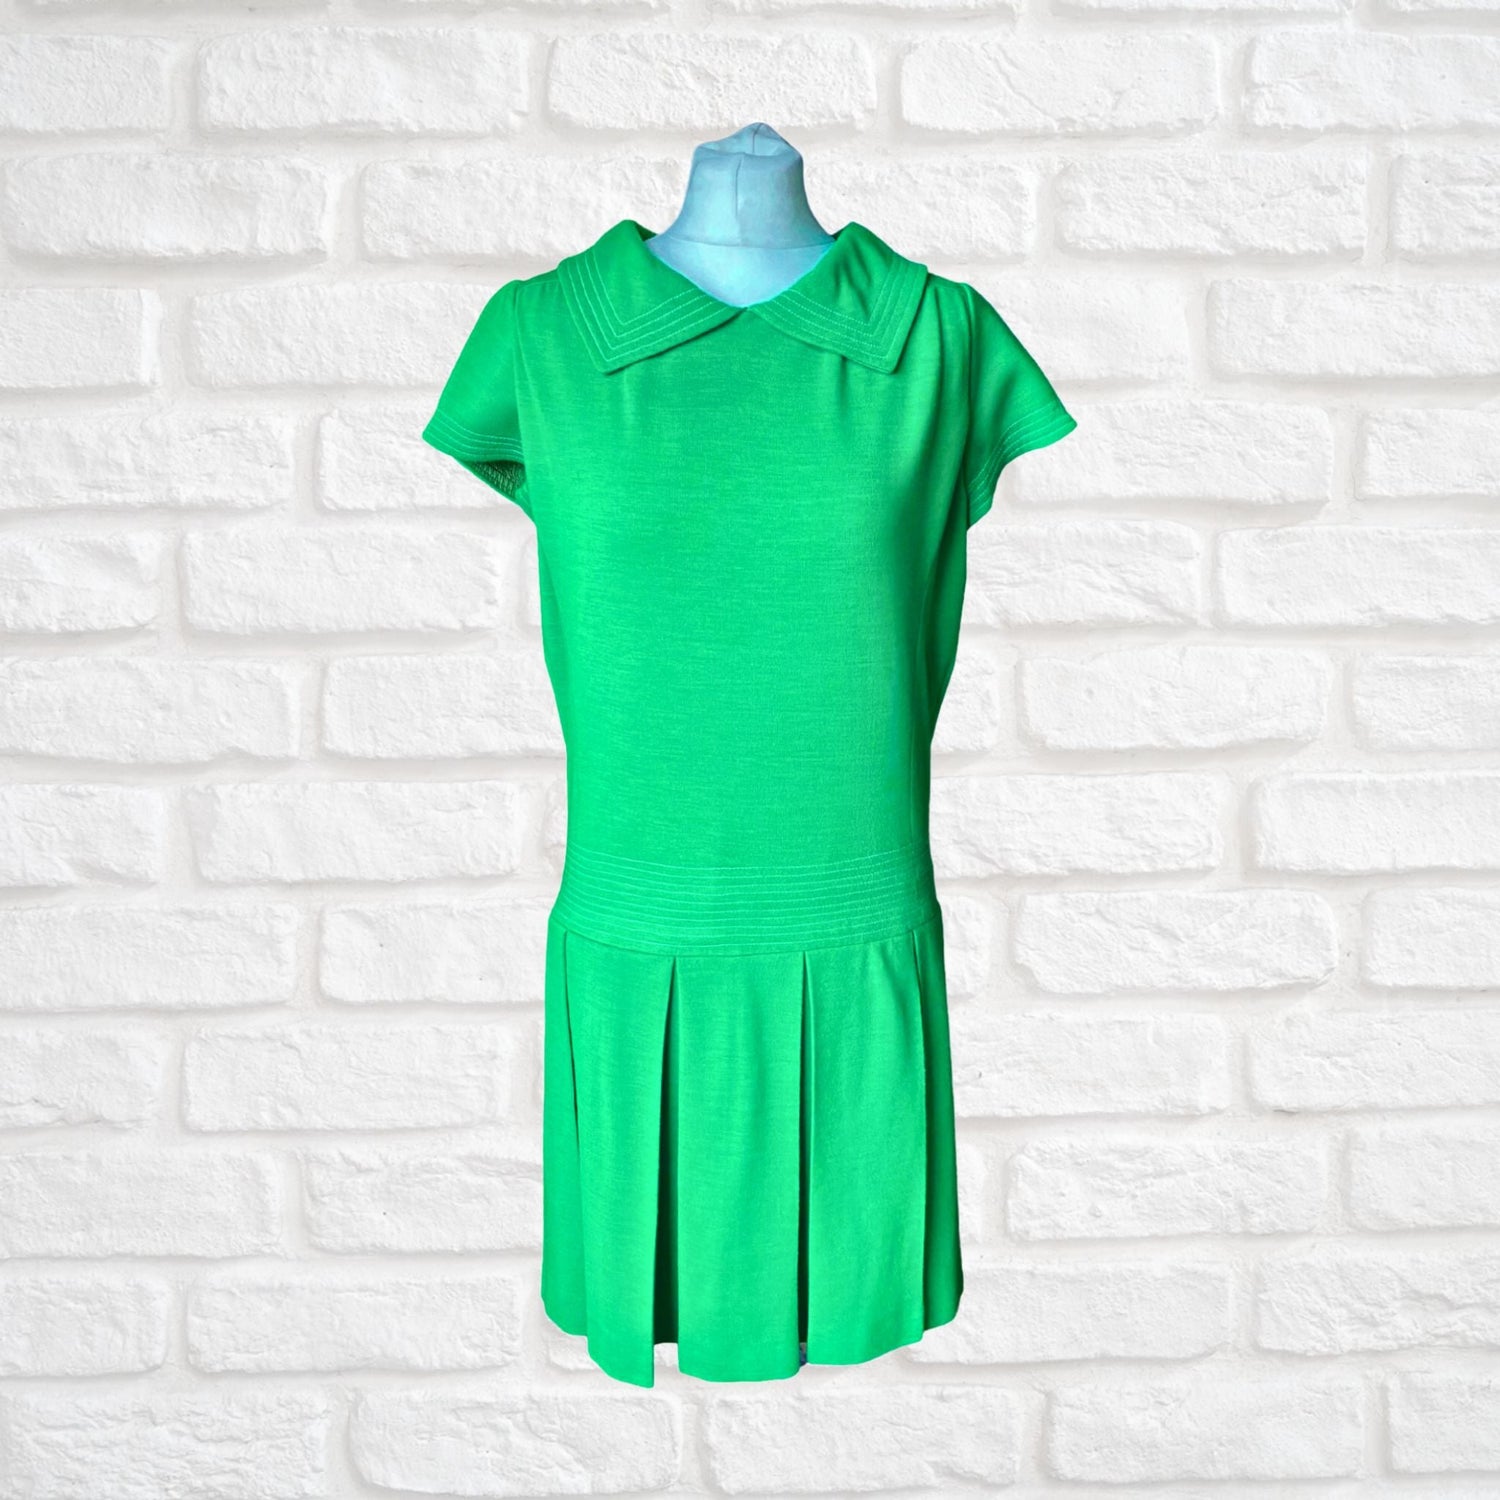 A green 1960s scooter dress with sailor collar and pleated skirt 